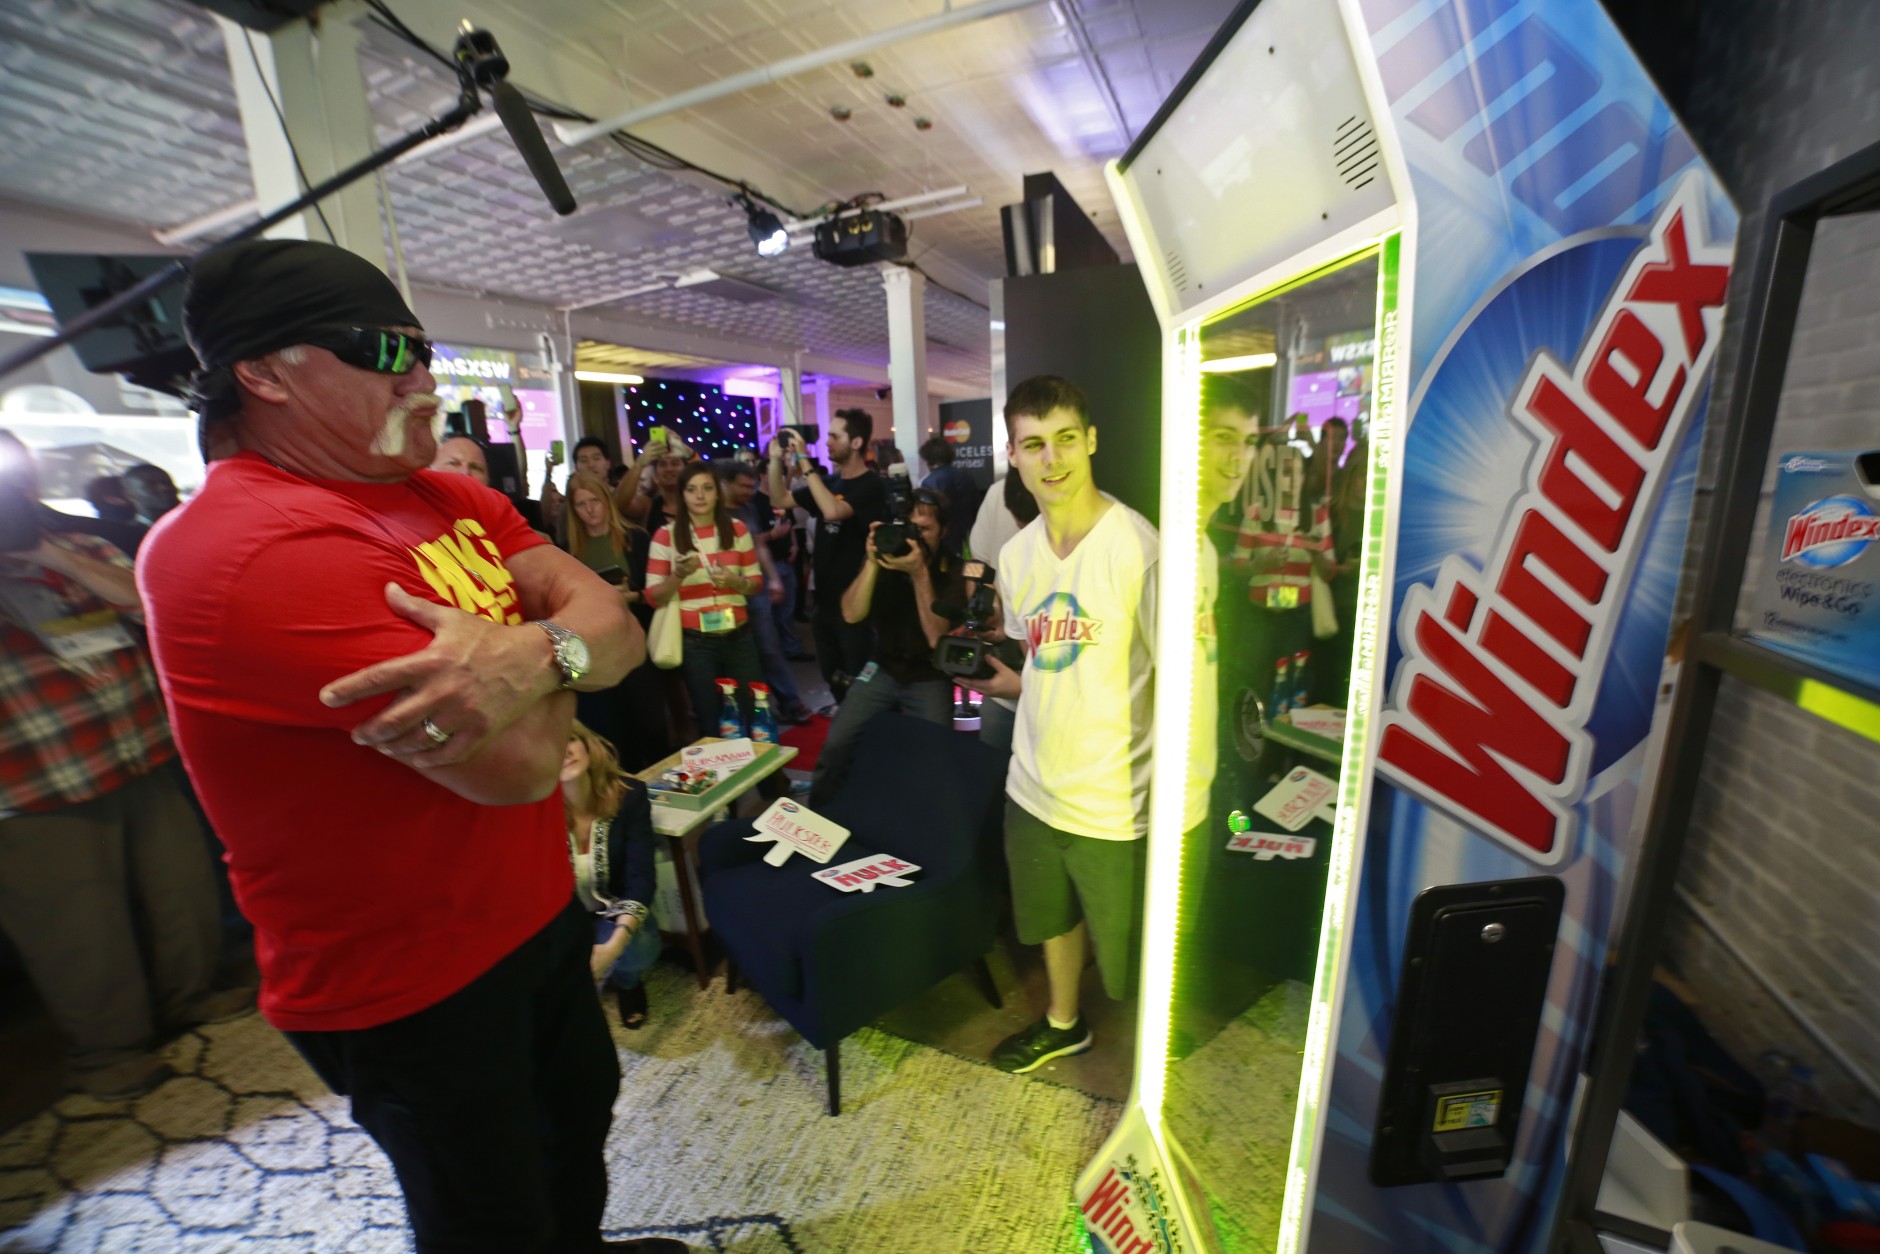 IMAGE DISTRIBUTED FOR WINDEX - WWE superstar, Hulk Hogan, center, poses for his official selfie at the Windex Selfie Mirror Station at Mashable House, during South by Southwest, Sunday, March 15, 2015, in Austin, Texas. (J. Michael Short/AP Images for Windex)